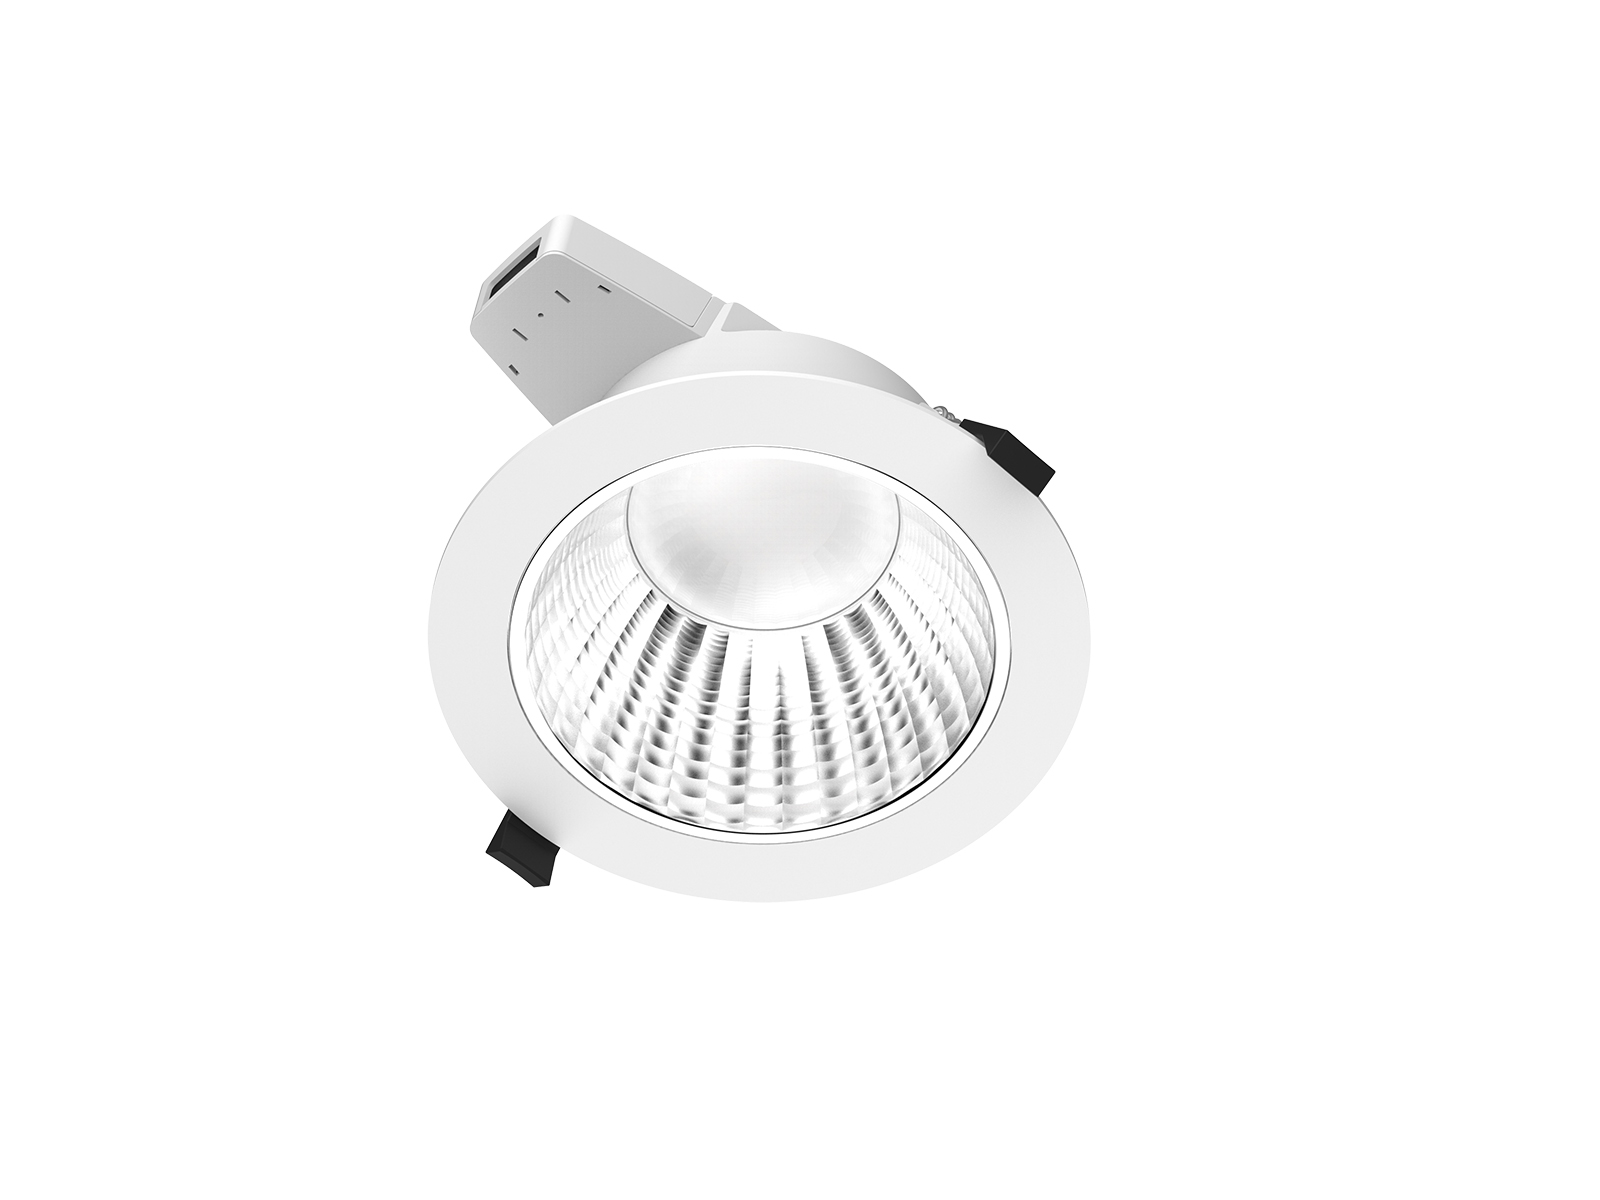 18w round led downlight fixtures